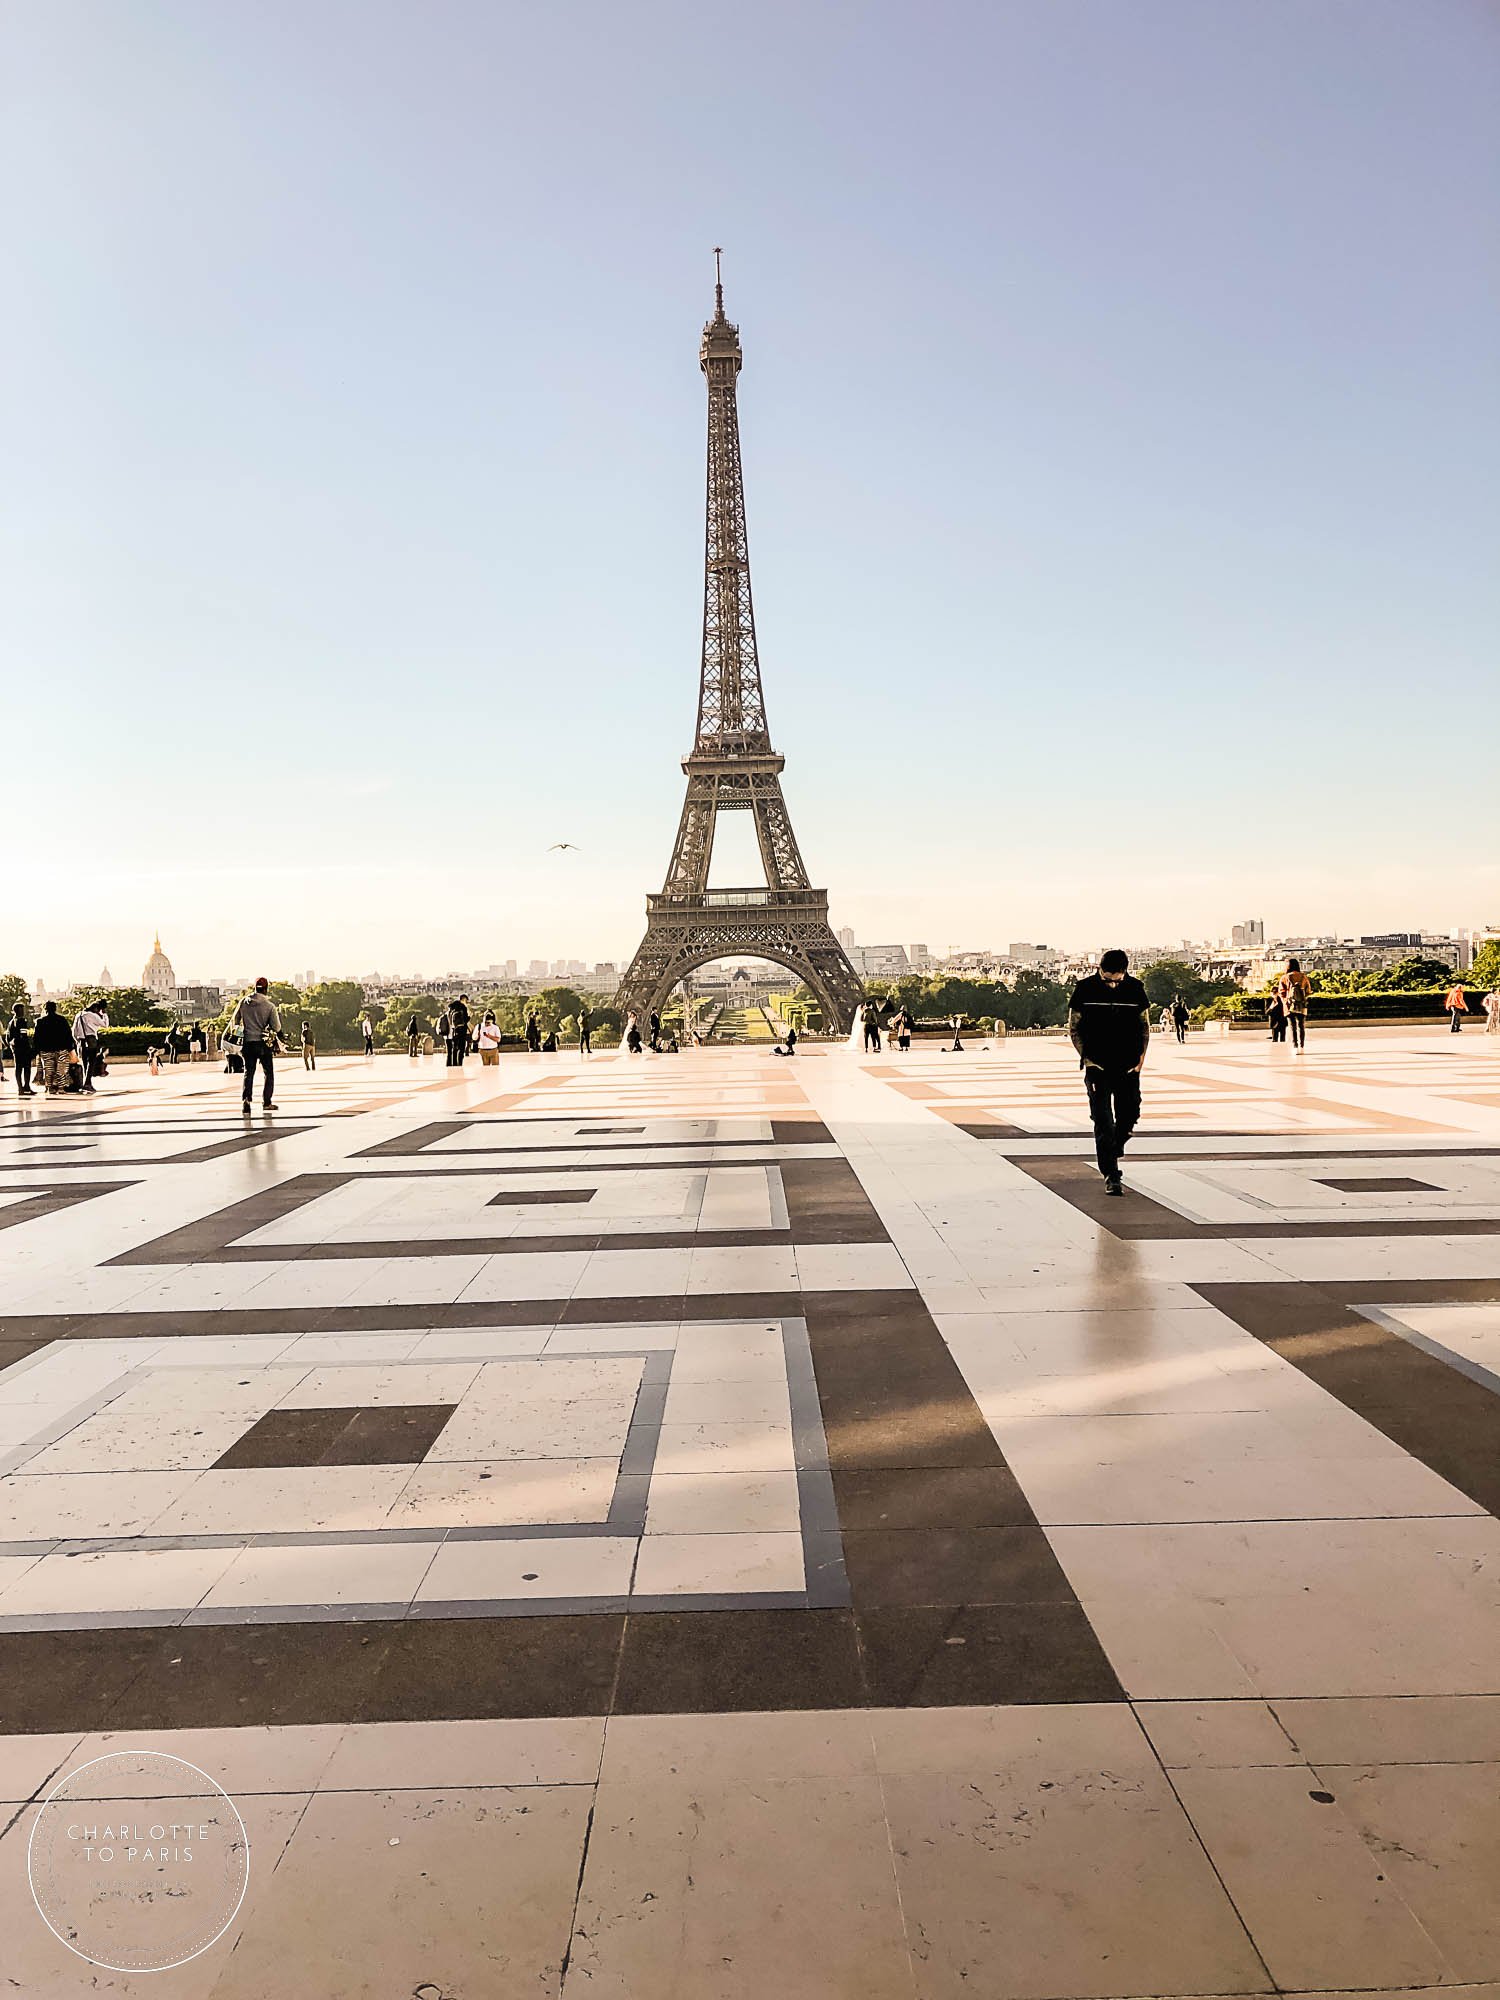 Eiffel Tower Viewing Deck Prices, Discounts, Hours & Guide